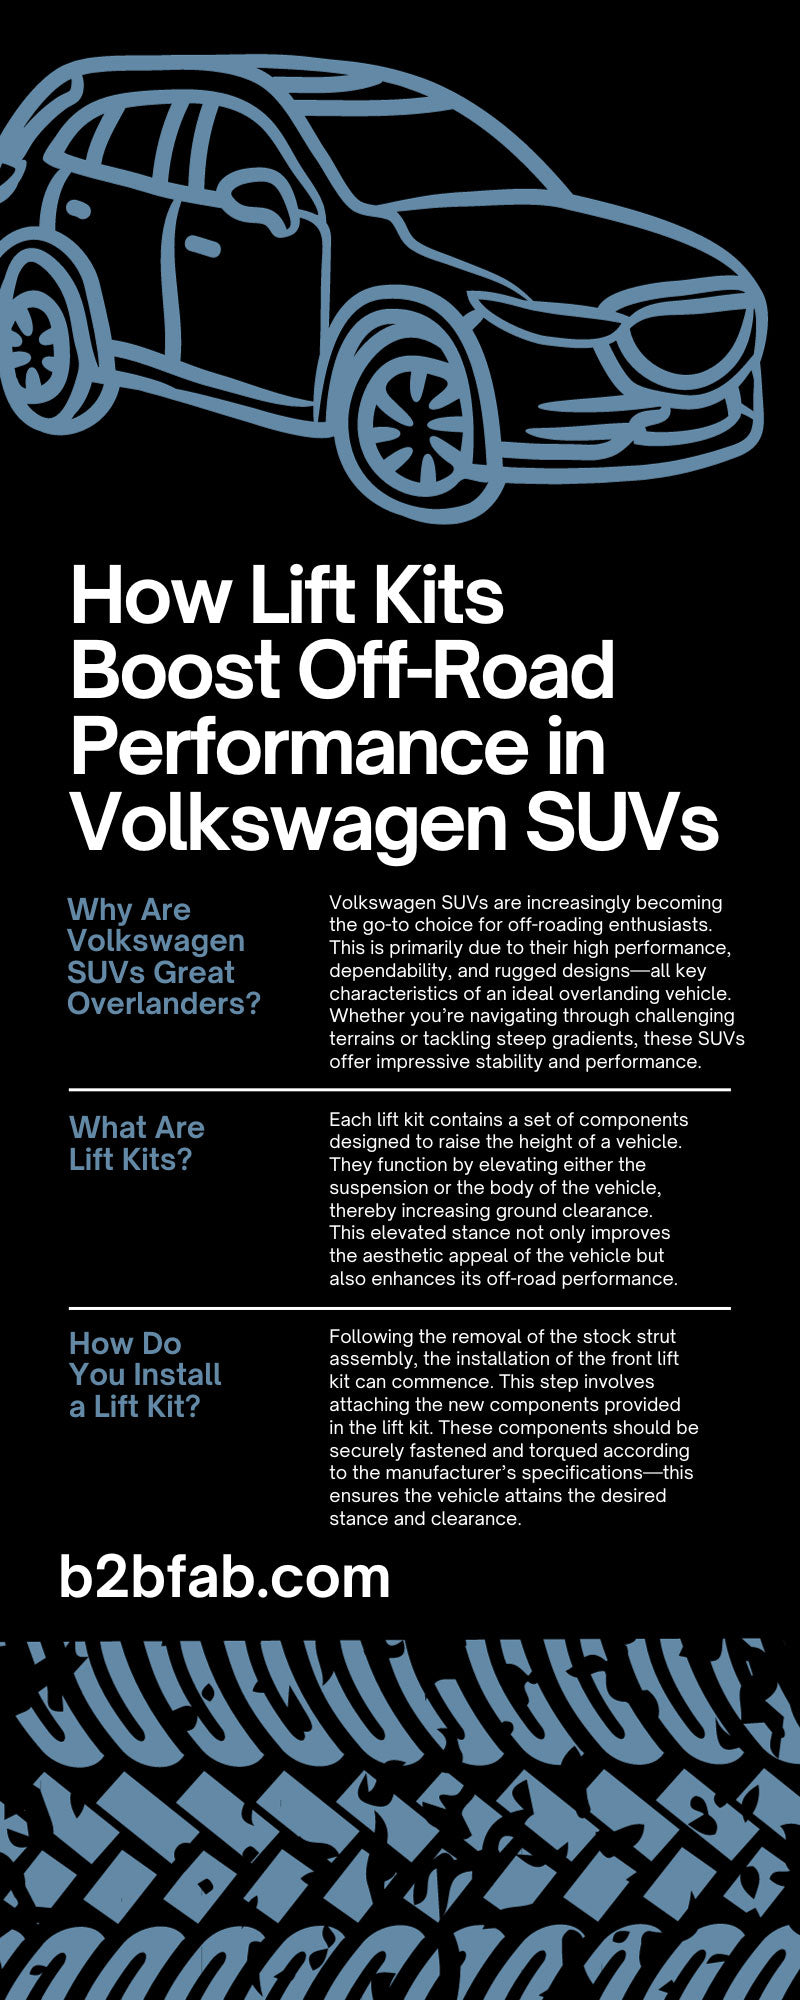 How Lift Kits Boost Off-Road Performance in Volkswagen SUVs